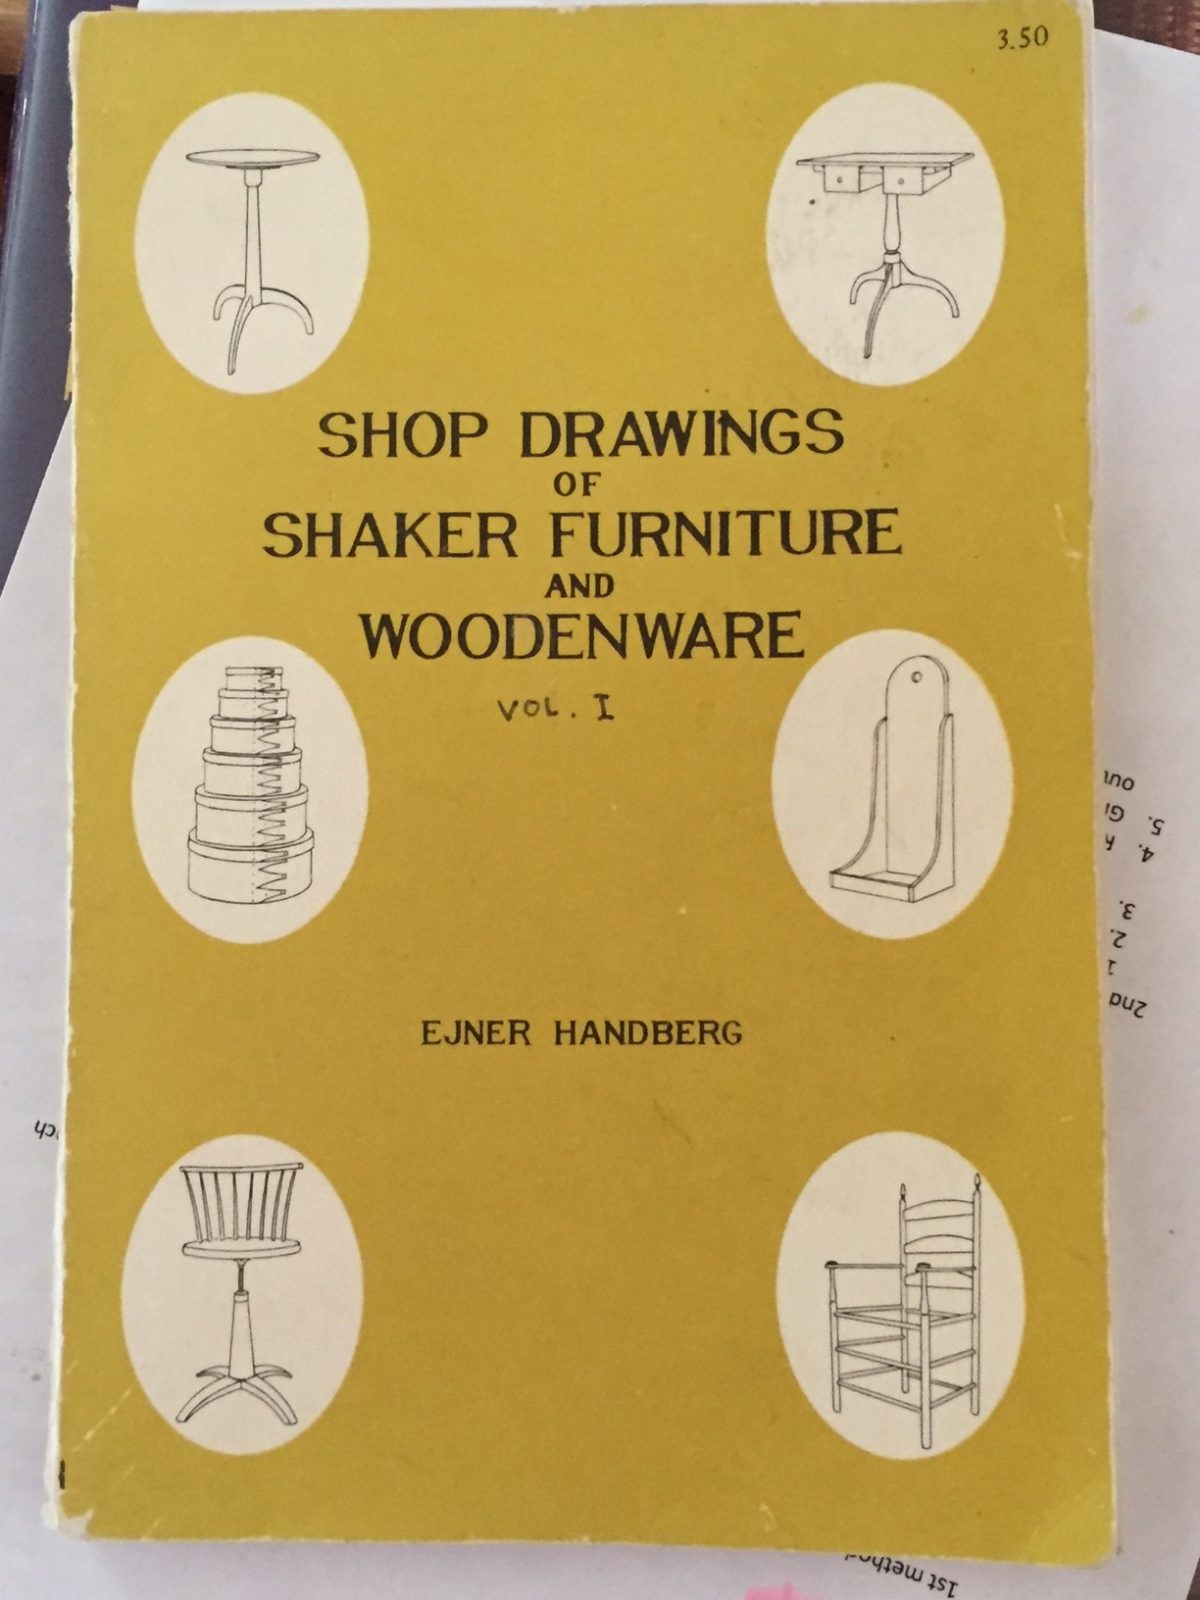 The design and dimensions come from this gem of a book, Shop Drawings of Shaker Furniture and Woodenware by Ejner Handberg. I placed an order for my own copy as soon as Chris showed it to me.